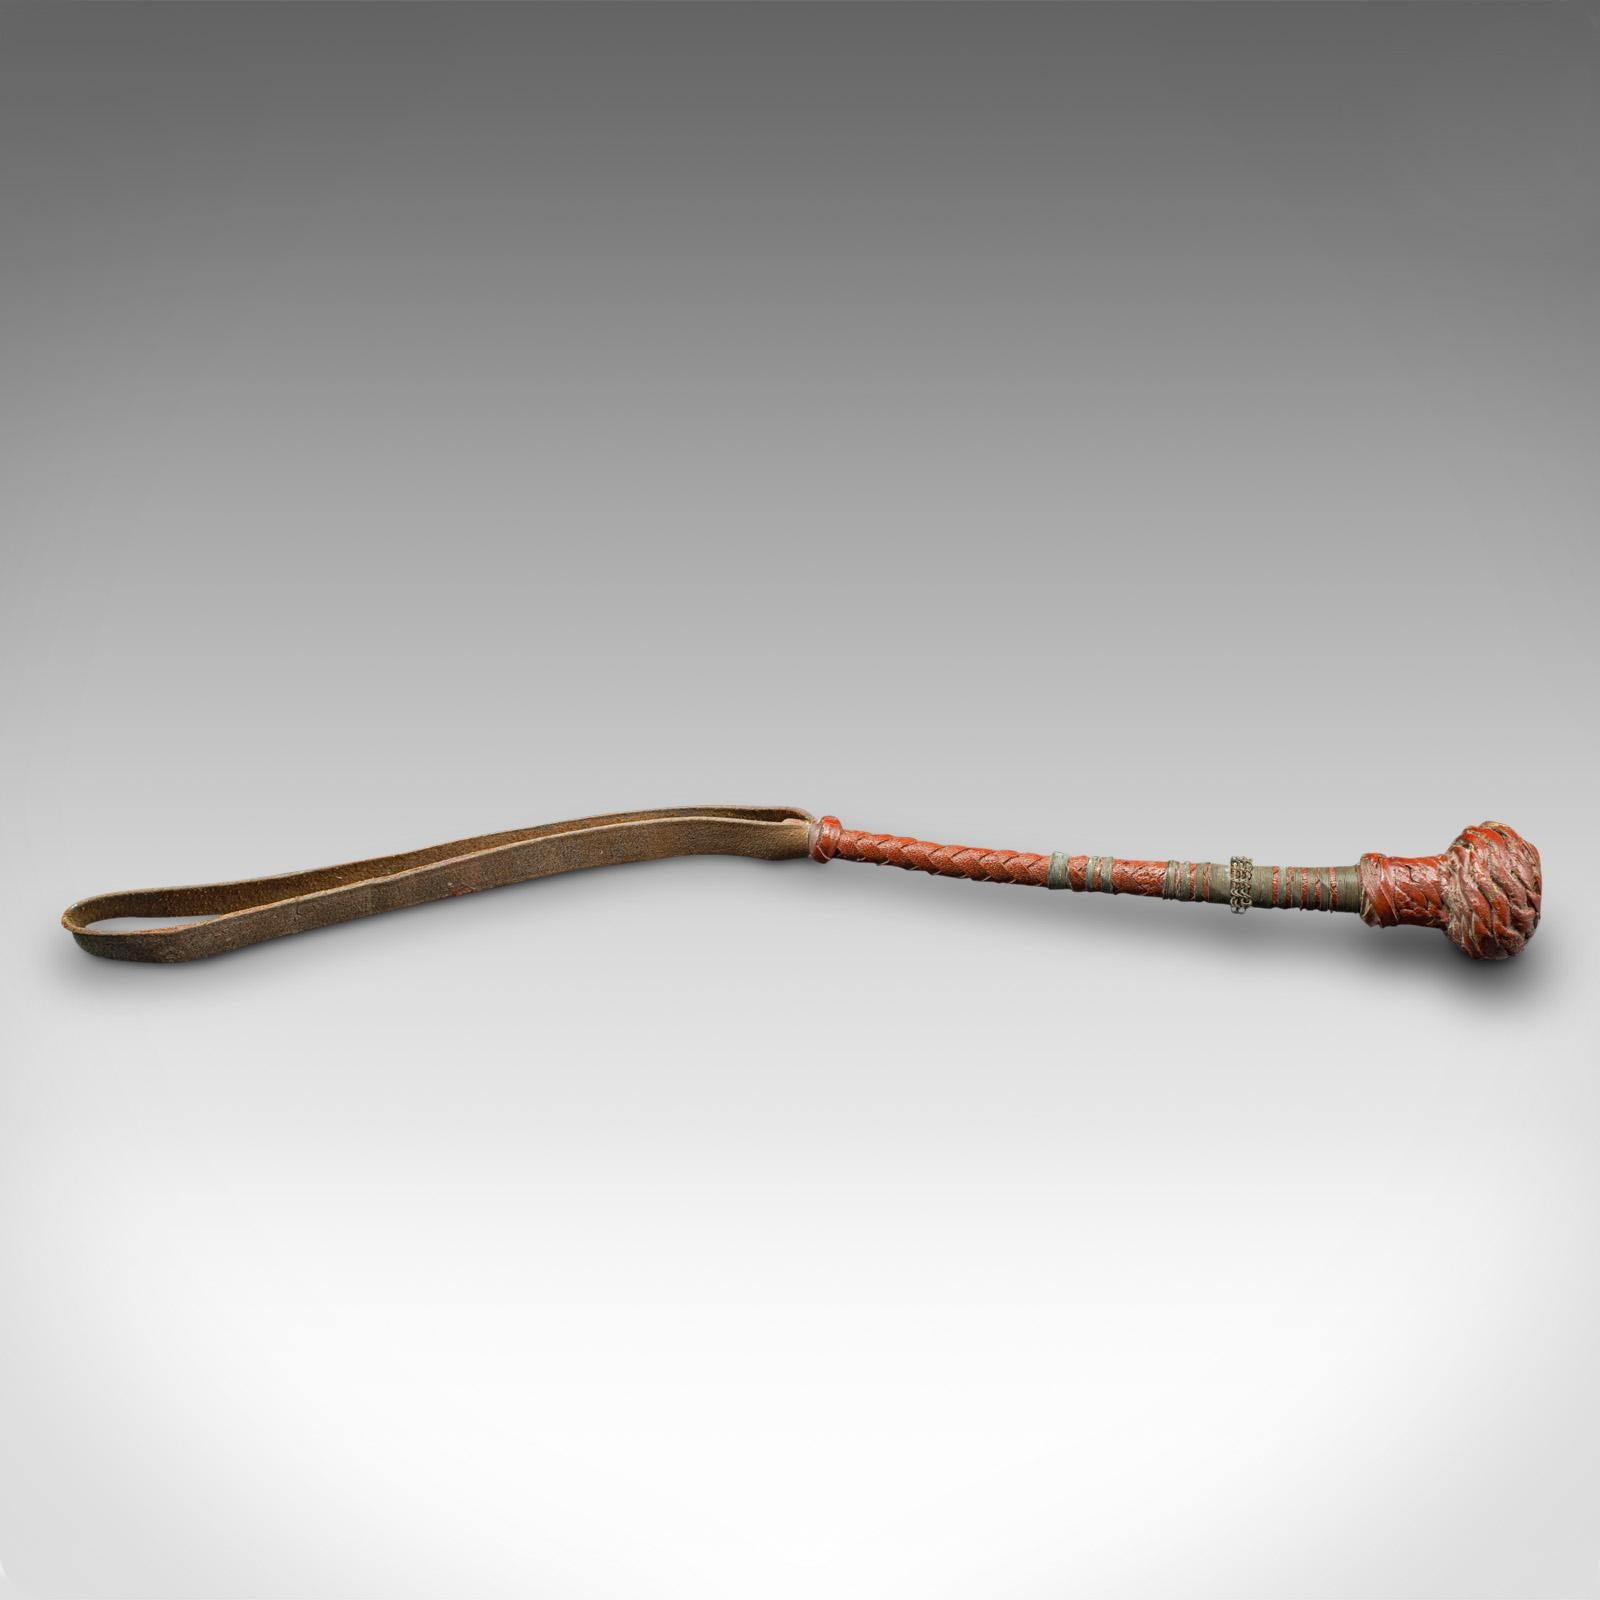 This is an antique camel whip. An Arabic, leather rider's crop, dating to the late Victorian period, circa 1900.

Fascinating leather whip, with appealing colour
Displays a desirable aged patina throughout
Woven leather handle tanned to a warm